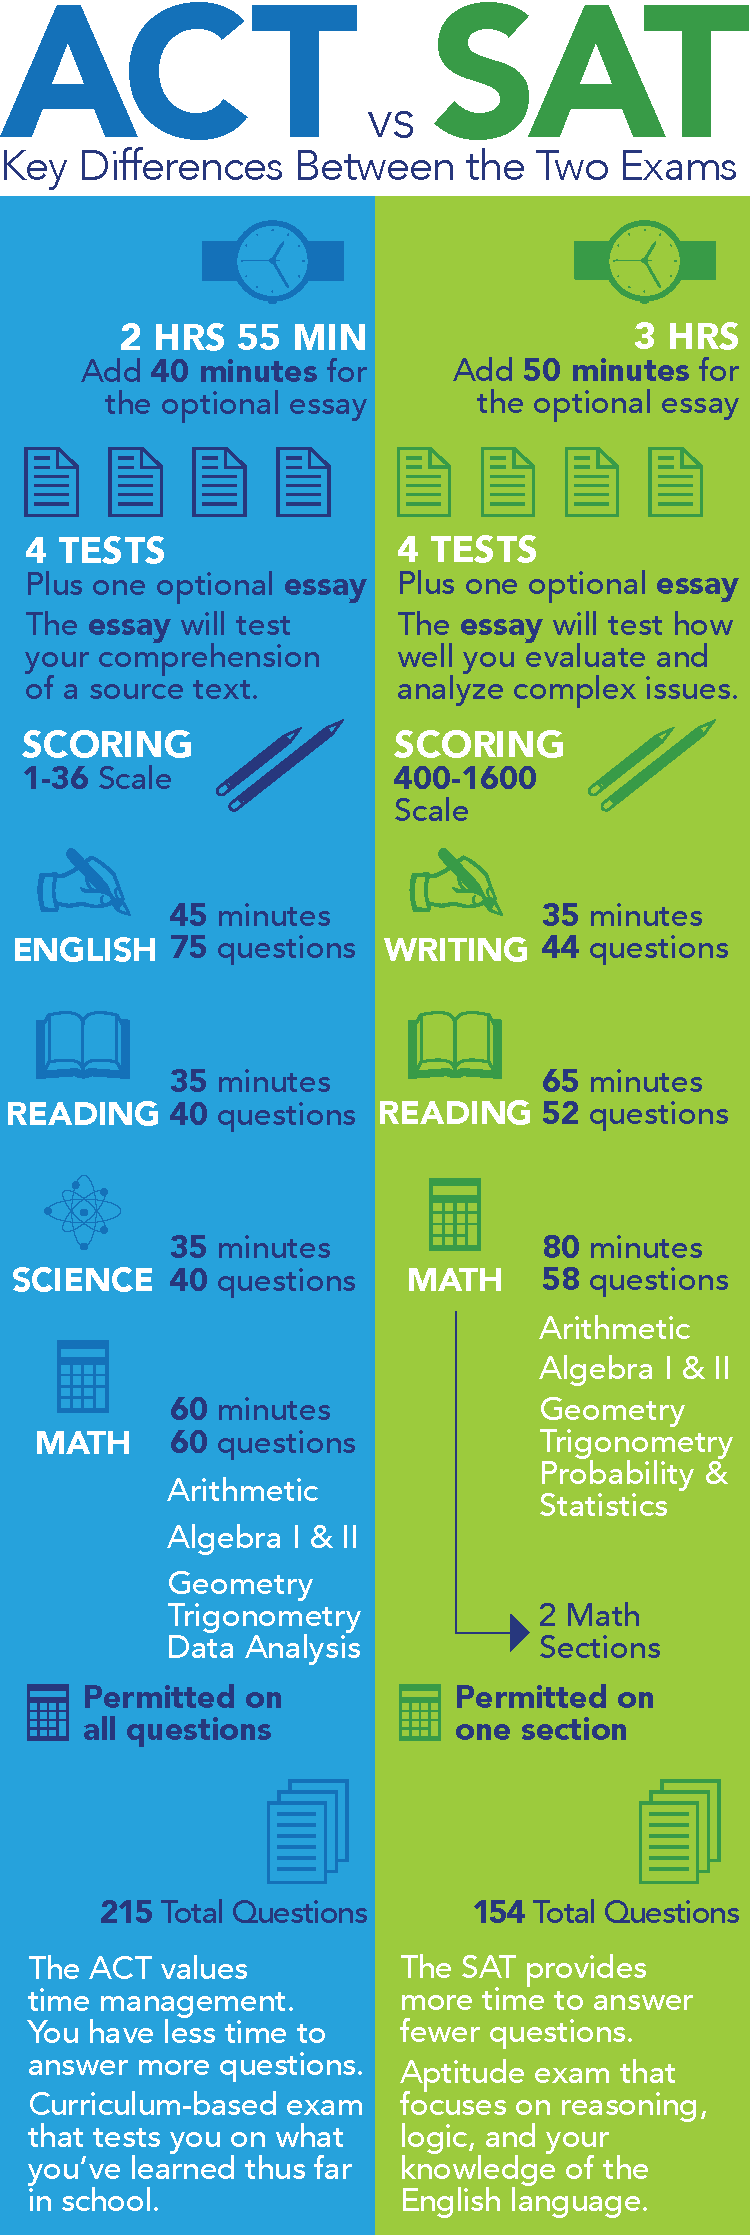 ACT vs SAT: Key Differences Between the Two Exams. The ACT: 2 hours 55 minutes, add 40 minutes for the optional essay. Scoring is based on a 1-36 scale. There are four test sections plus one optional essay; the essay will test your comprehension of a source text. Subsections are English (45 minutes to answer 75 questions), reading (35 minutes to answer 40 questions), math (60 minutes to answer 60 questions testing your knowledge of arithmetic, algebra I and II, geometry, trigonometry, and data analysis; calculators are permitted for all questions), and science (35 minutes to answer 40 questions). There are 215 questions total. The ACT values time management. You have less time to answer more questions. It’s a curriculum-based exam that tests you on what you’ve learned thus far in school. The SAT: 3 hours, add 50 minutes for the optional essay. Scoring is based on a 400-1600 scale. There are four test sections plus one optional essay; the essay will test how well you evaluate and analyze complex issues. Subsections are writing (35 minutes to answer 44 questions), reading (65 minutes to answer 52 questions), and two math sections (80 minutes to answer 58 questions testing your knowledge of arithmetic, algebra I and II, geometry, trigonometry, and probability and statistics; calculators are permitted on one of the two math sections). There are 154 questions total. The SAT provides more time to answer fewer questions. It is an aptitude exam that focuses on reasoning, logic, and your knowledge of the English language.